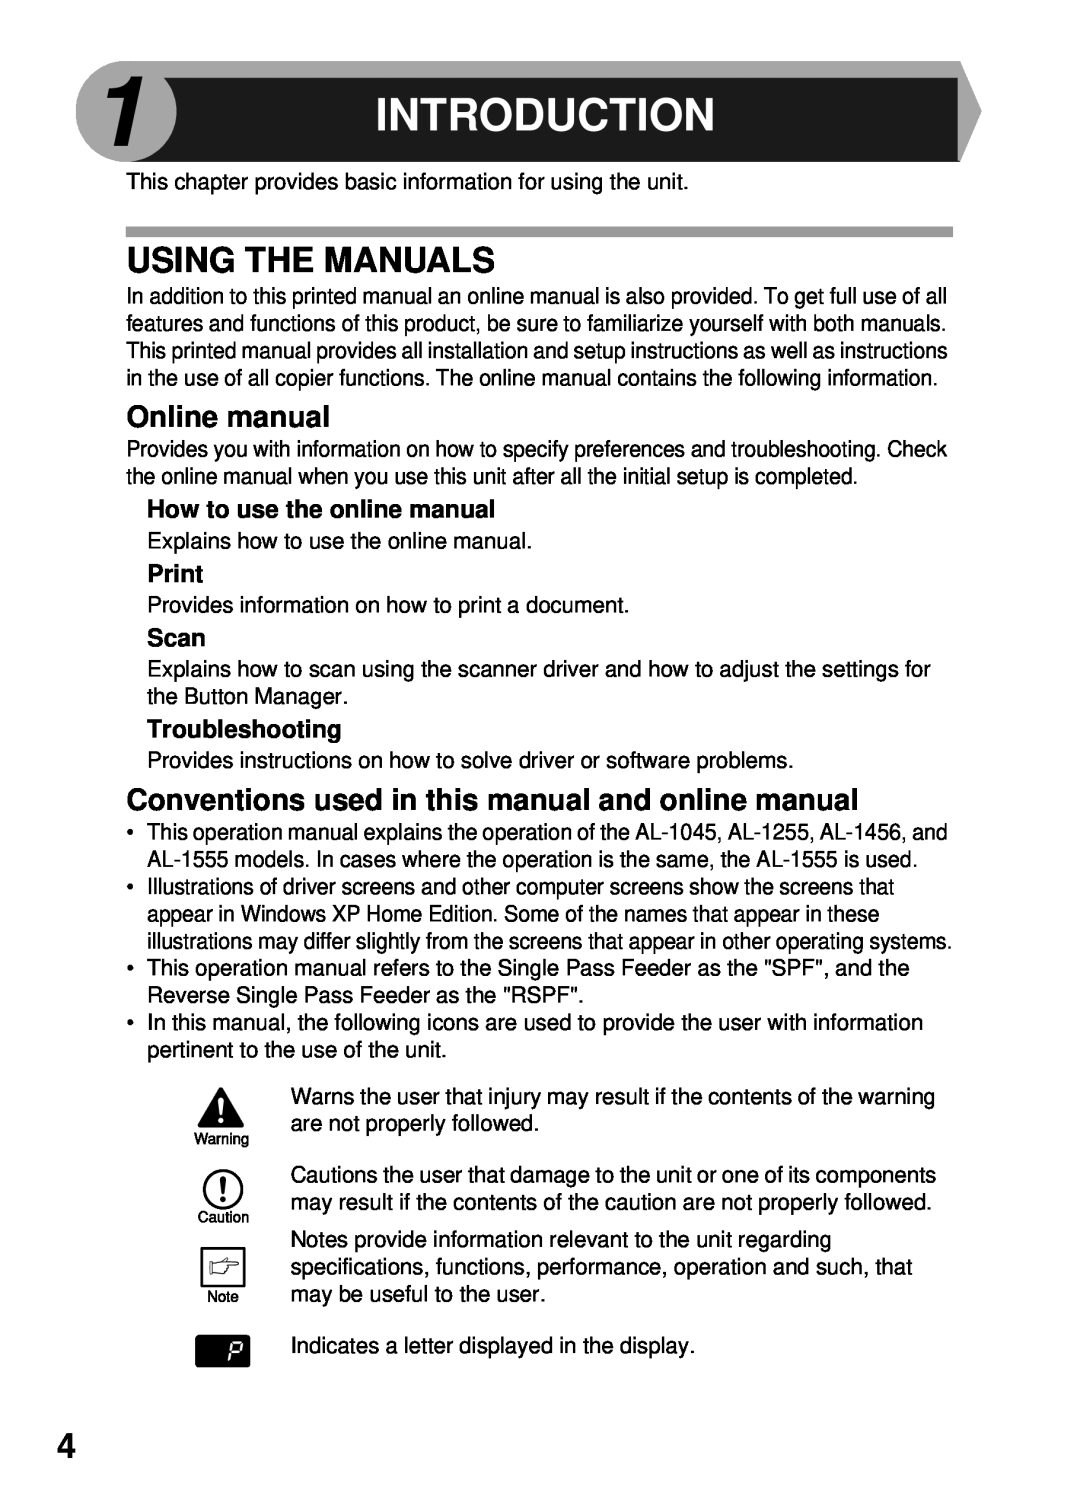 Sharp AL-1045, AL-1555 Introduction, Using The Manuals, Online manual, Conventions used in this manual and online manual 